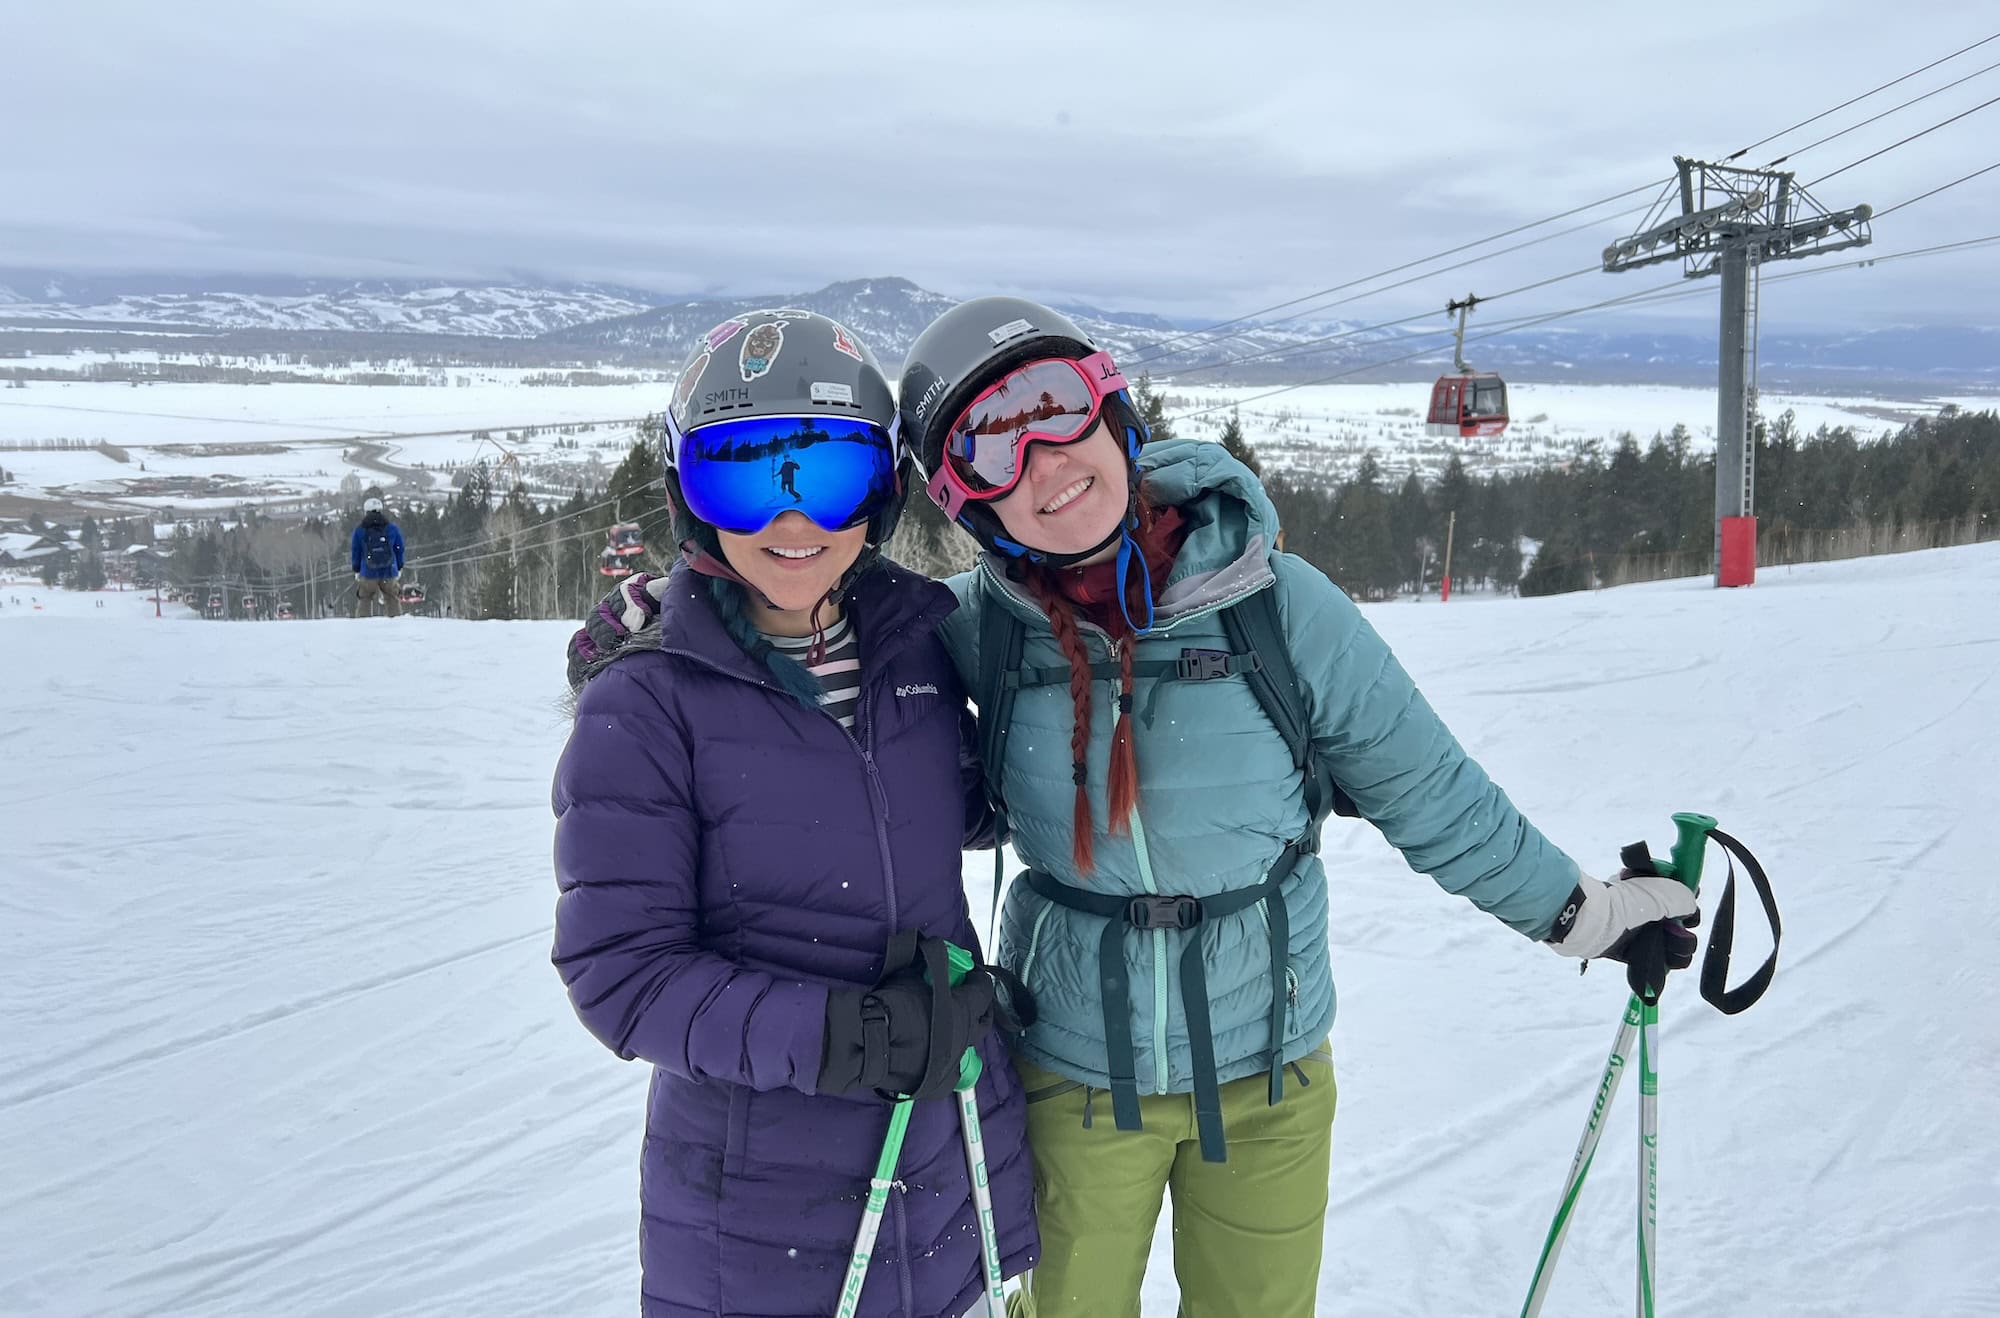 Emily and her friend skiing in Jackson Hole